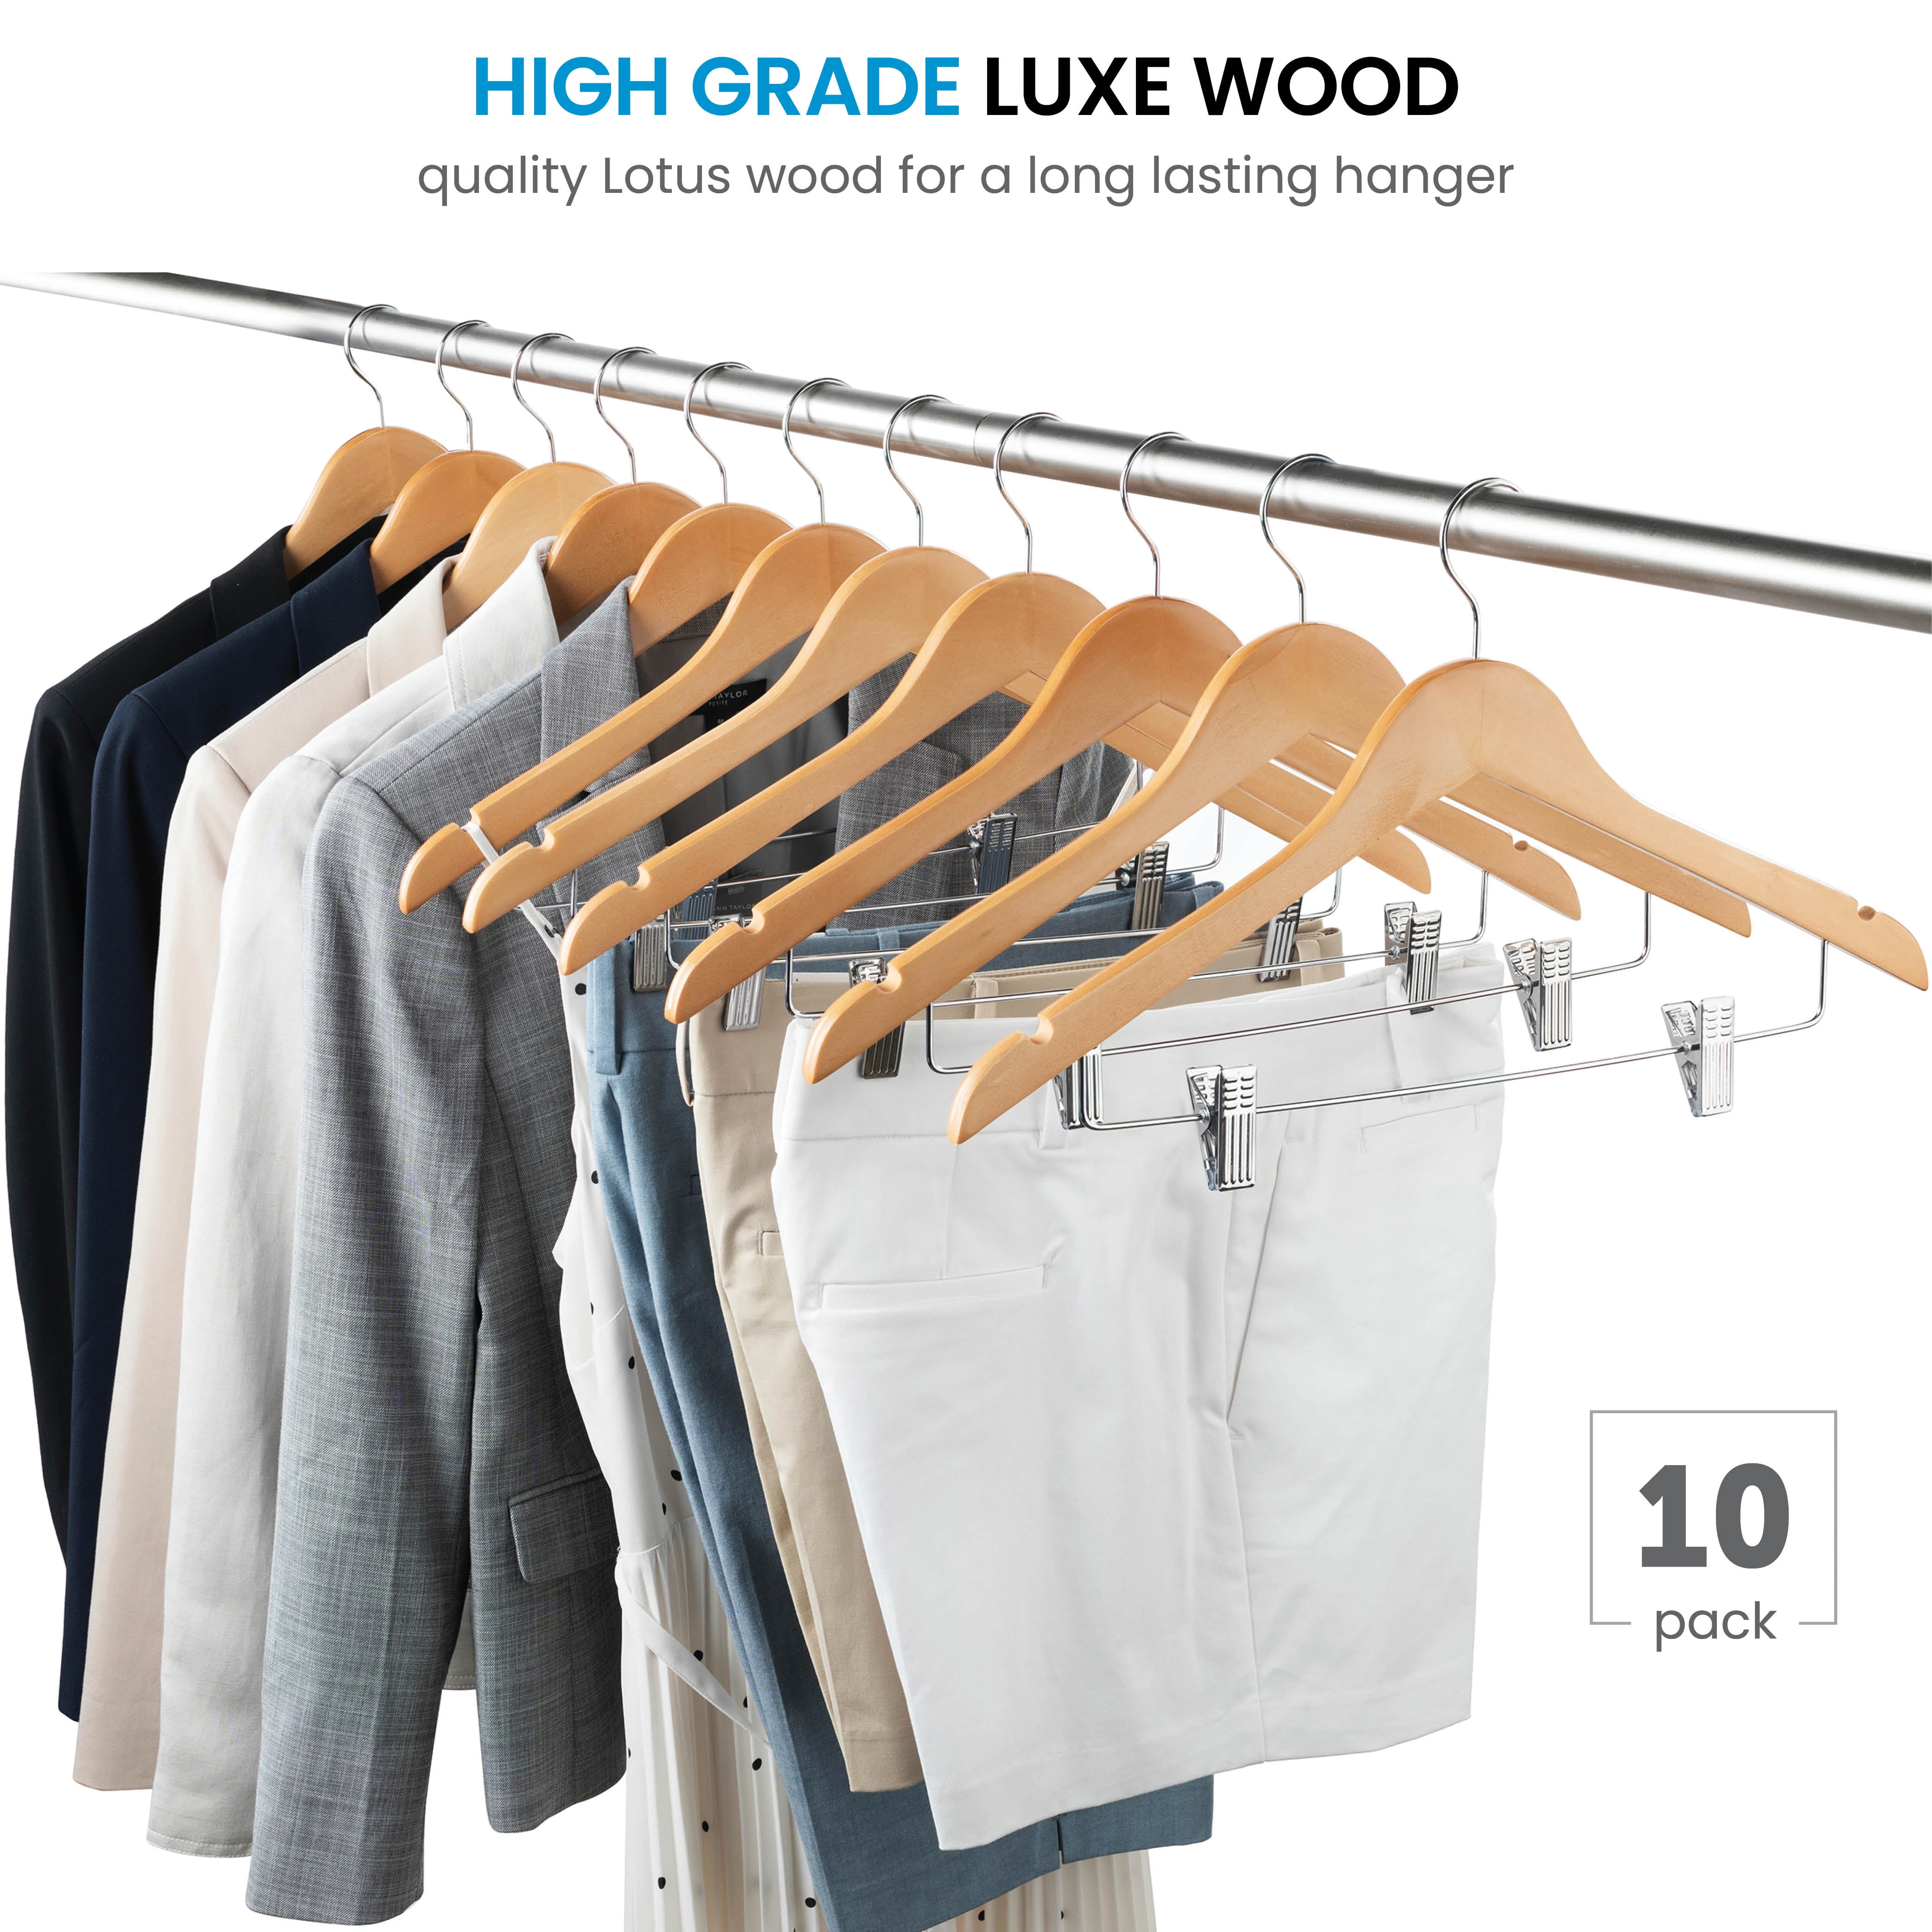 Case of 120 Slim Wooden Shirt Hanger w/ Notches Lotus, 17-3/8 x 1/4 x 9-3/8 H | The Container Store